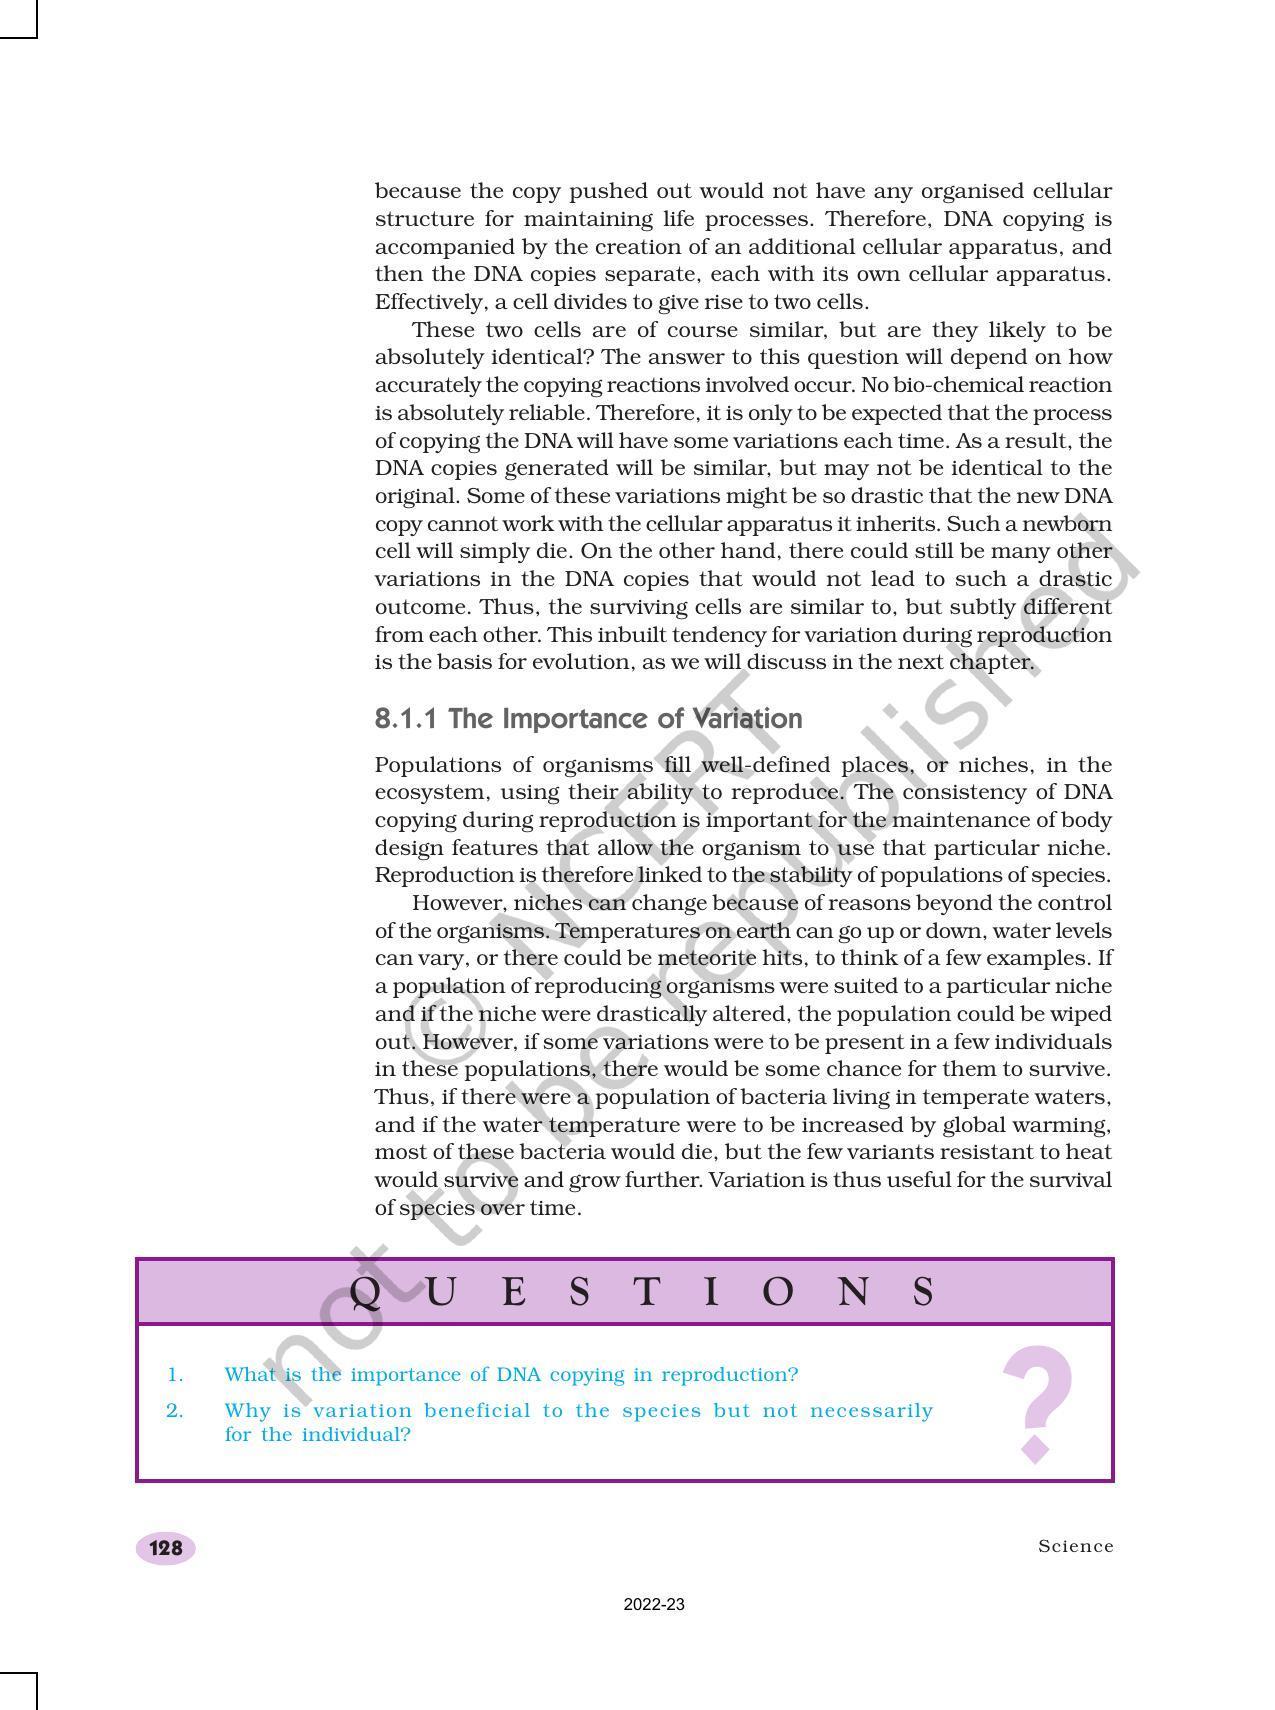 NCERT Book for Class 10 Science Chapter 8 How do Organisms Reproduce? - Page 2